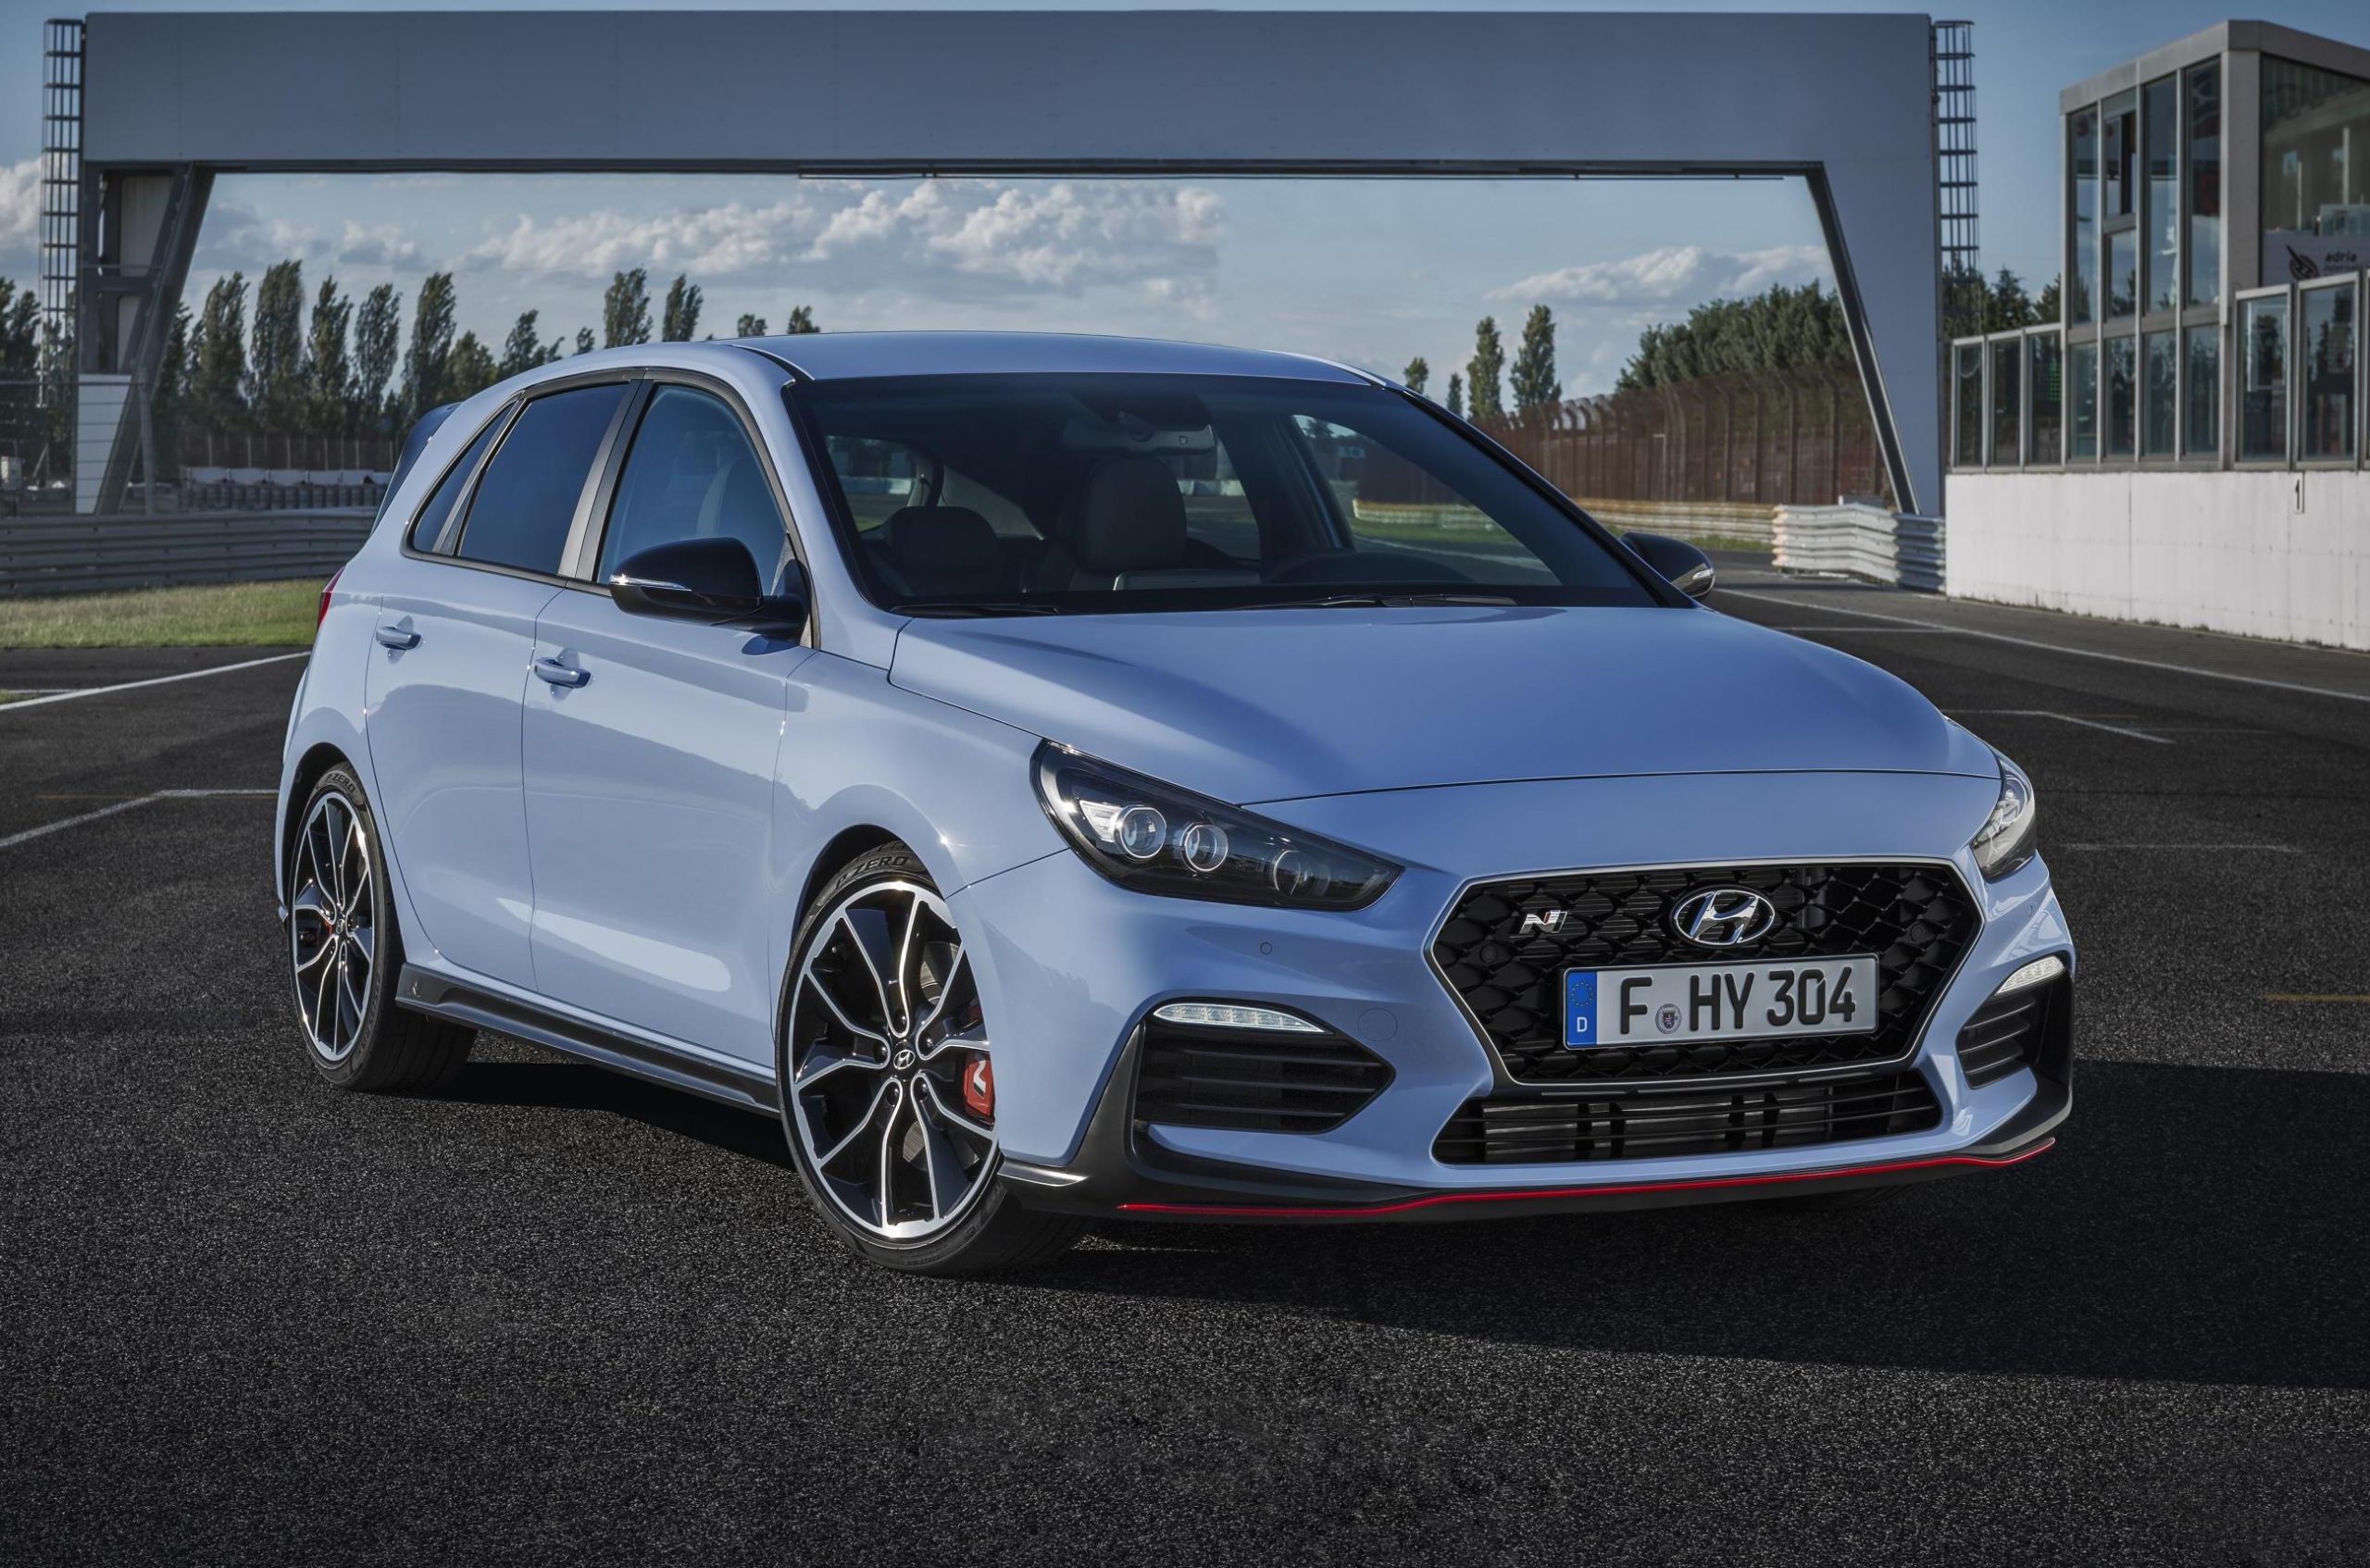 2018 Hyundai i30 N officially revealed; all-new hot hatch (video)